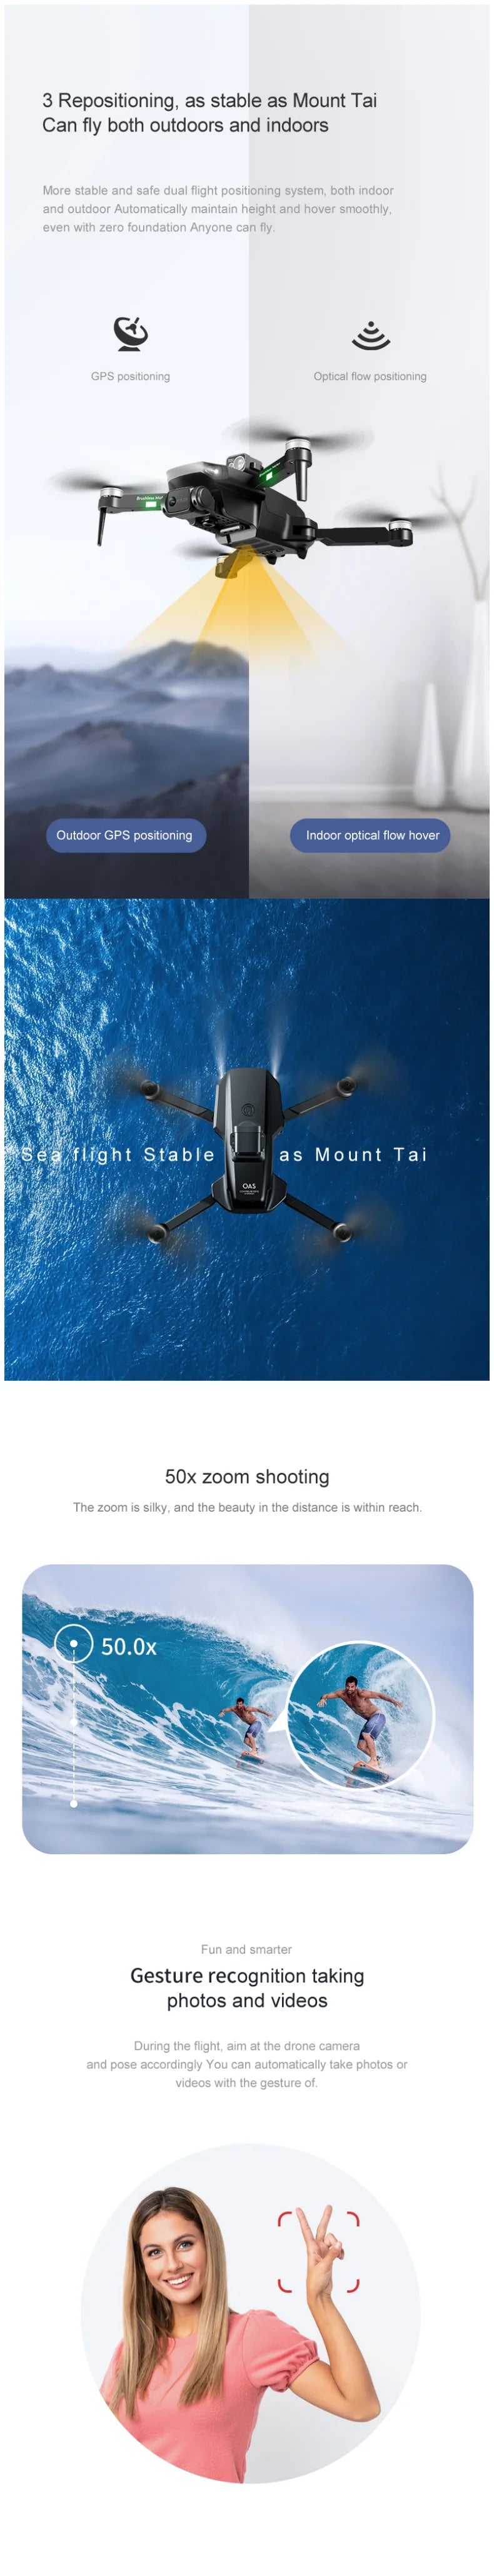 GR101 Drone, mount tai can fly both outdoors and indoors more stable